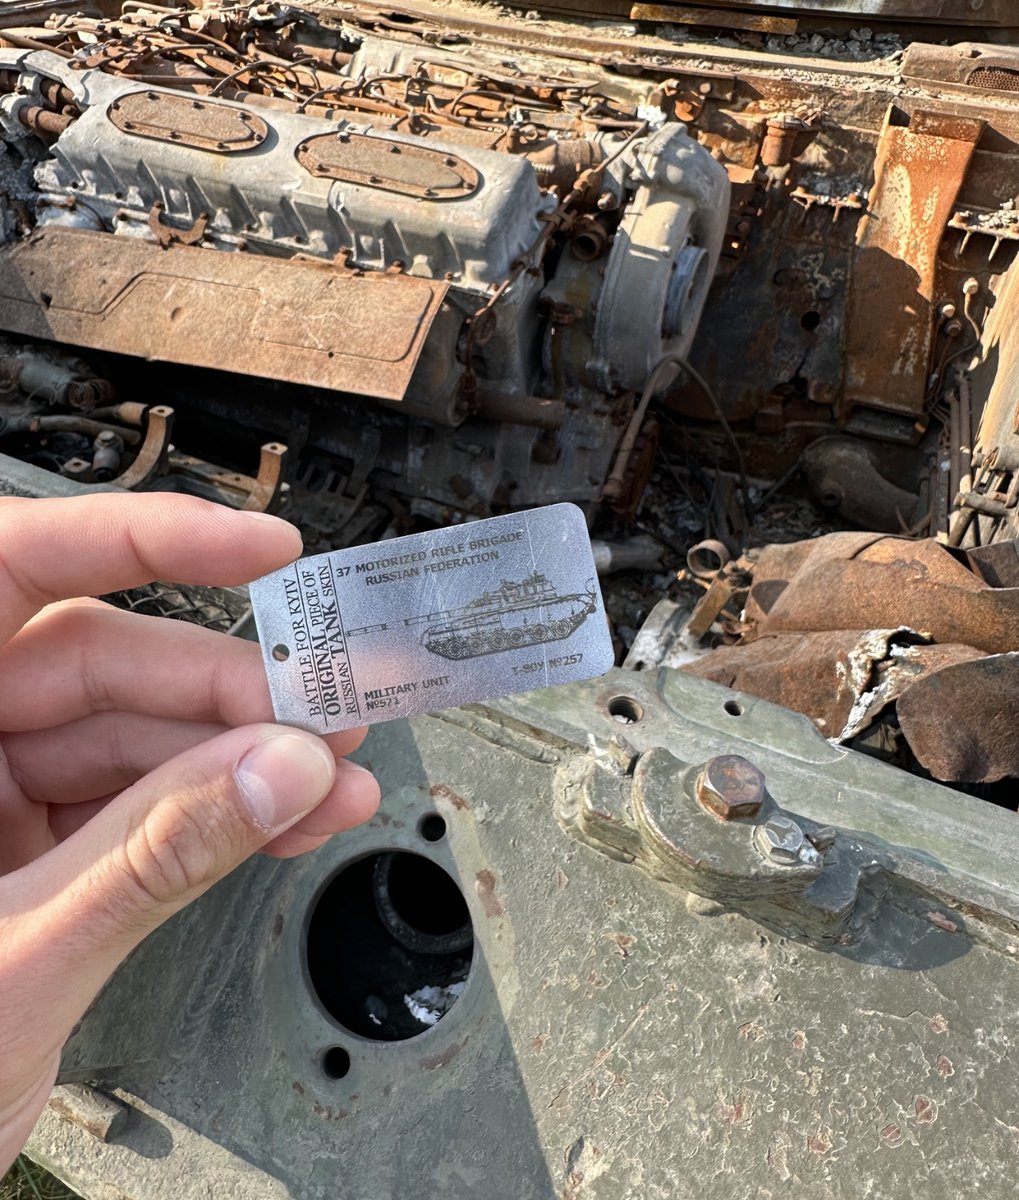 Part of the destroyed Russian T-80U tank. The keychain is made of recycled armor steel from the destroyed tank.

More on our website: createdinukraine.com

#UkraineRussiaWar #Ukraine #EU #UkraineWillWin #DefenceCentral